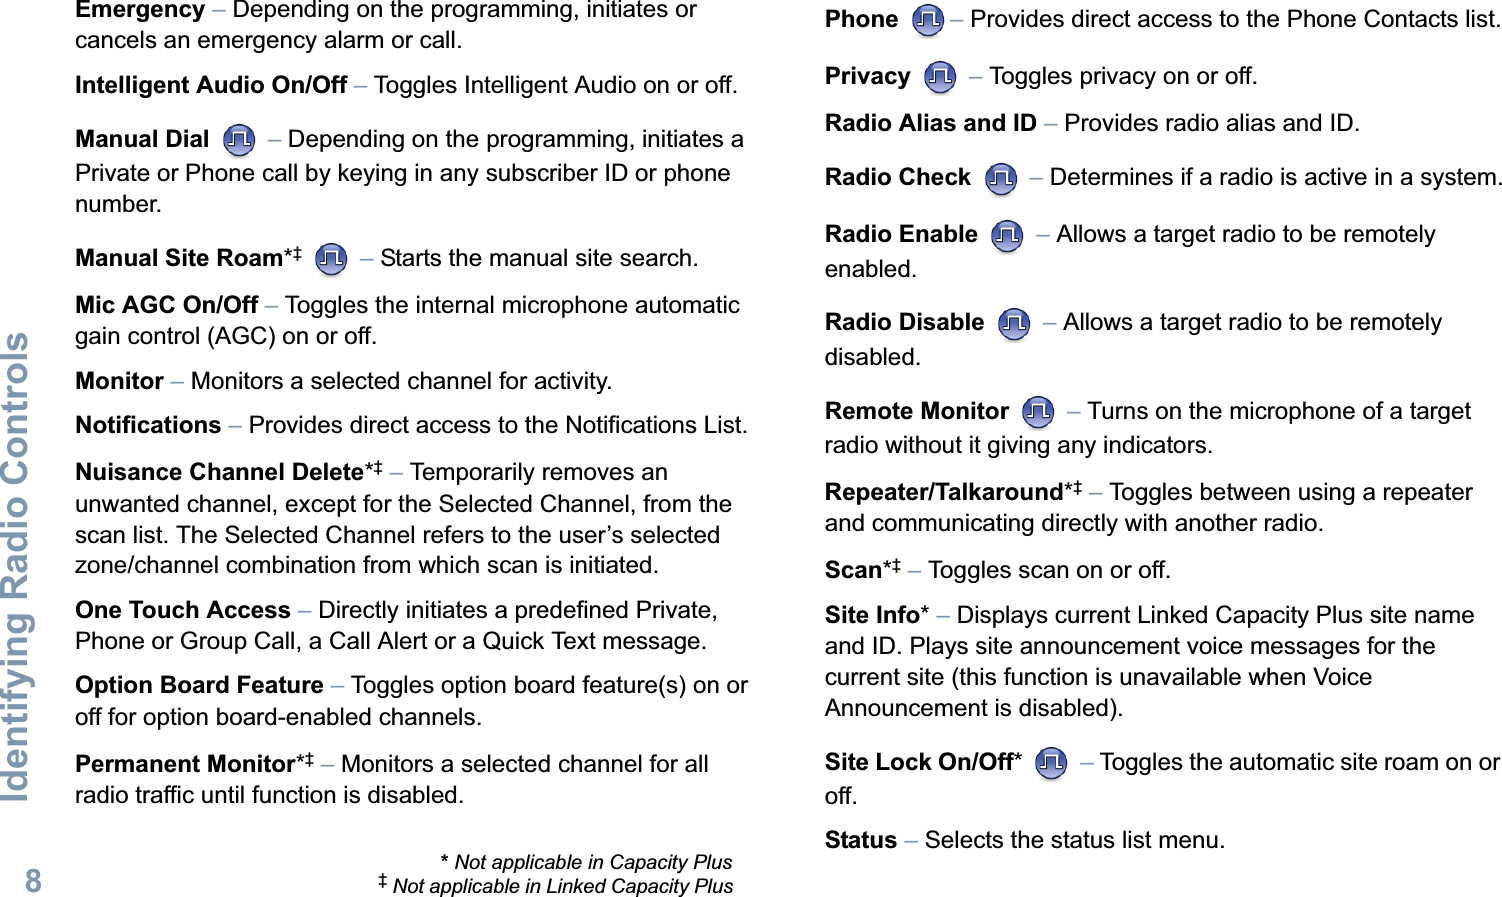 Identifying Radio ControlsEnglish8Emergency – Depending on the programming, initiates or cancels an emergency alarm or call.Intelligent Audio On/Off – Toggles Intelligent Audio on or off. Manual Dial  – Depending on the programming, initiates a Private or Phone call by keying in any subscriber ID or phone number.Manual Site Roam*‡  – Starts the manual site search.Mic AGC On/Off – Toggles the internal microphone automatic gain control (AGC) on or off.  Monitor – Monitors a selected channel for activity.Notifications – Provides direct access to the Notifications List.Nuisance Channel Delete*‡ – Temporarily removes an unwanted channel, except for the Selected Channel, from the scan list. The Selected Channel refers to the user’s selected zone/channel combination from which scan is initiated.One Touch Access – Directly initiates a predefined Private, Phone or Group Call, a Call Alert or a Quick Text message.Option Board Feature – Toggles option board feature(s) on or off for option board-enabled channels. Permanent Monitor*‡ – Monitors a selected channel for all radio traffic until function is disabled.Phone – Provides direct access to the Phone Contacts list.Privacy  – Toggles privacy on or off.Radio Alias and ID – Provides radio alias and ID.Radio Check  – Determines if a radio is active in a system.Radio Enable  – Allows a target radio to be remotely enabled.Radio Disable  – Allows a target radio to be remotely disabled.Remote Monitor   – Turns on the microphone of a target radio without it giving any indicators.Repeater/Talkaround*‡ – Toggles between using a repeater and communicating directly with another radio.Scan*‡ – Toggles scan on or off.Site Info* – Displays current Linked Capacity Plus site name and ID. Plays site announcement voice messages for the current site (this function is unavailable when Voice Announcement is disabled).Site Lock On/Off*  – Toggles the automatic site roam on or off.Status – Selects the status list menu. * Not applicable in Capacity Plus‡ Not applicable in Linked Capacity Plus